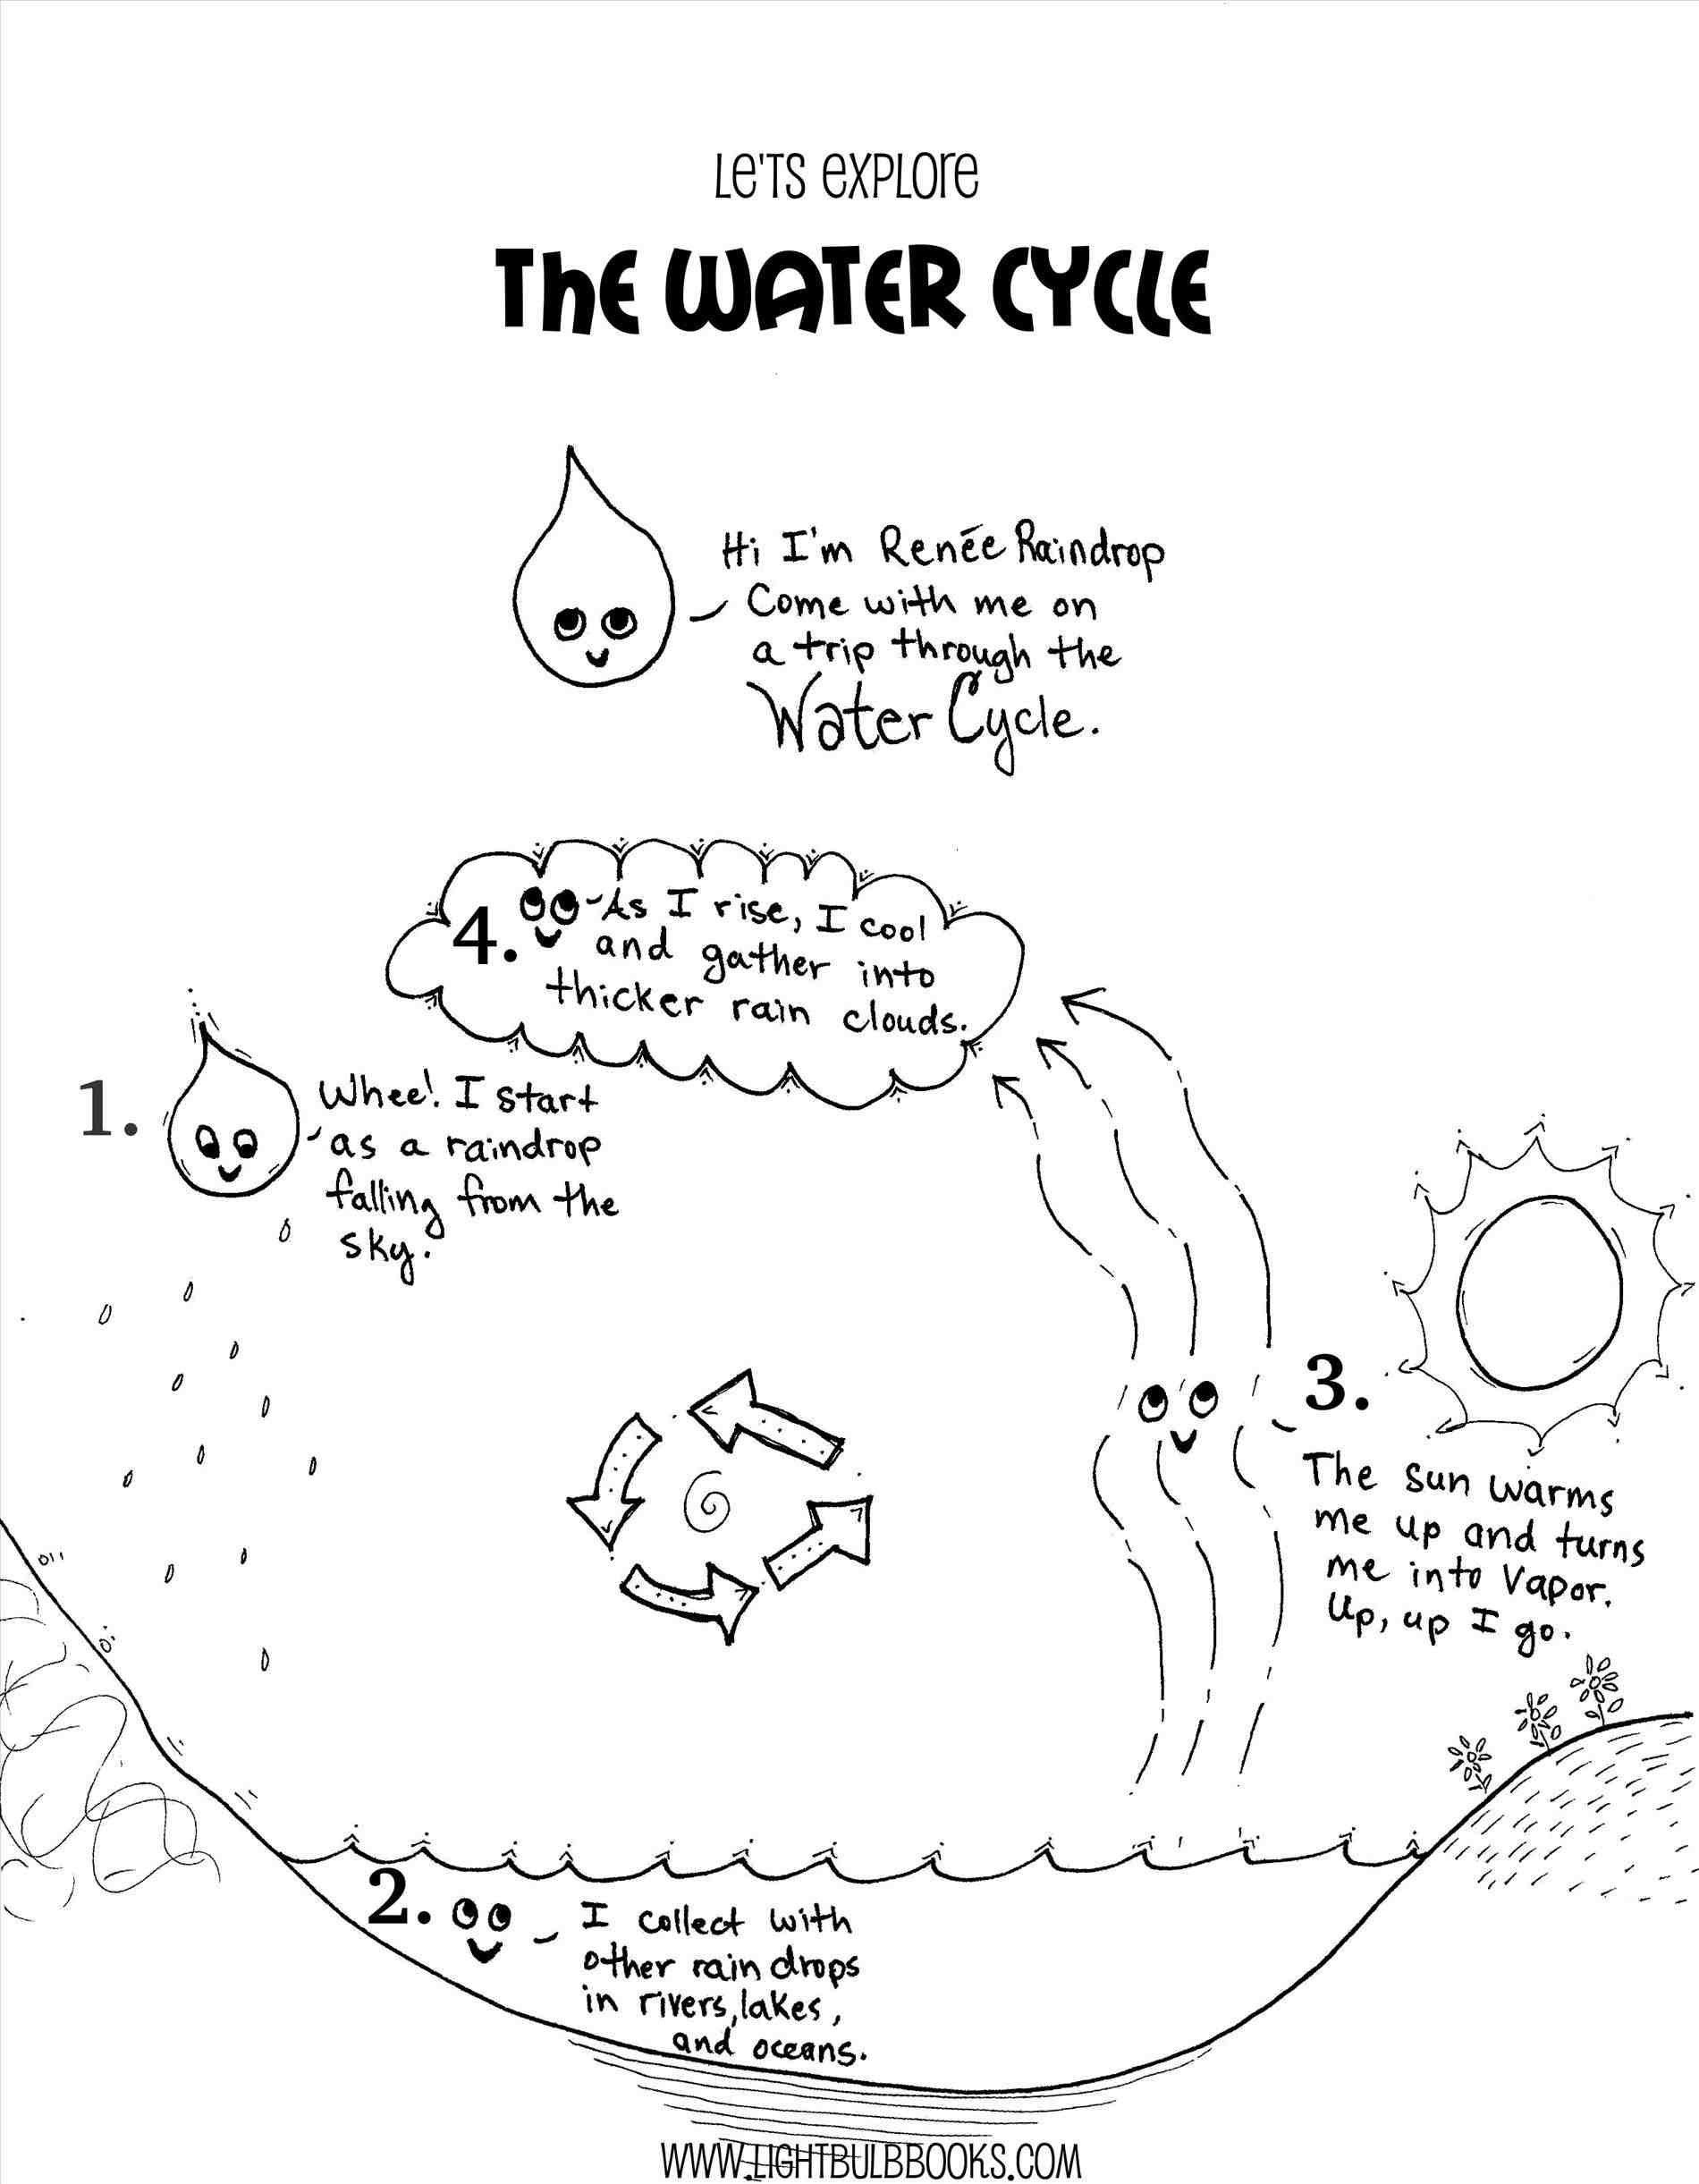 the-water-cycle-worksheet-answer-key-db-excel